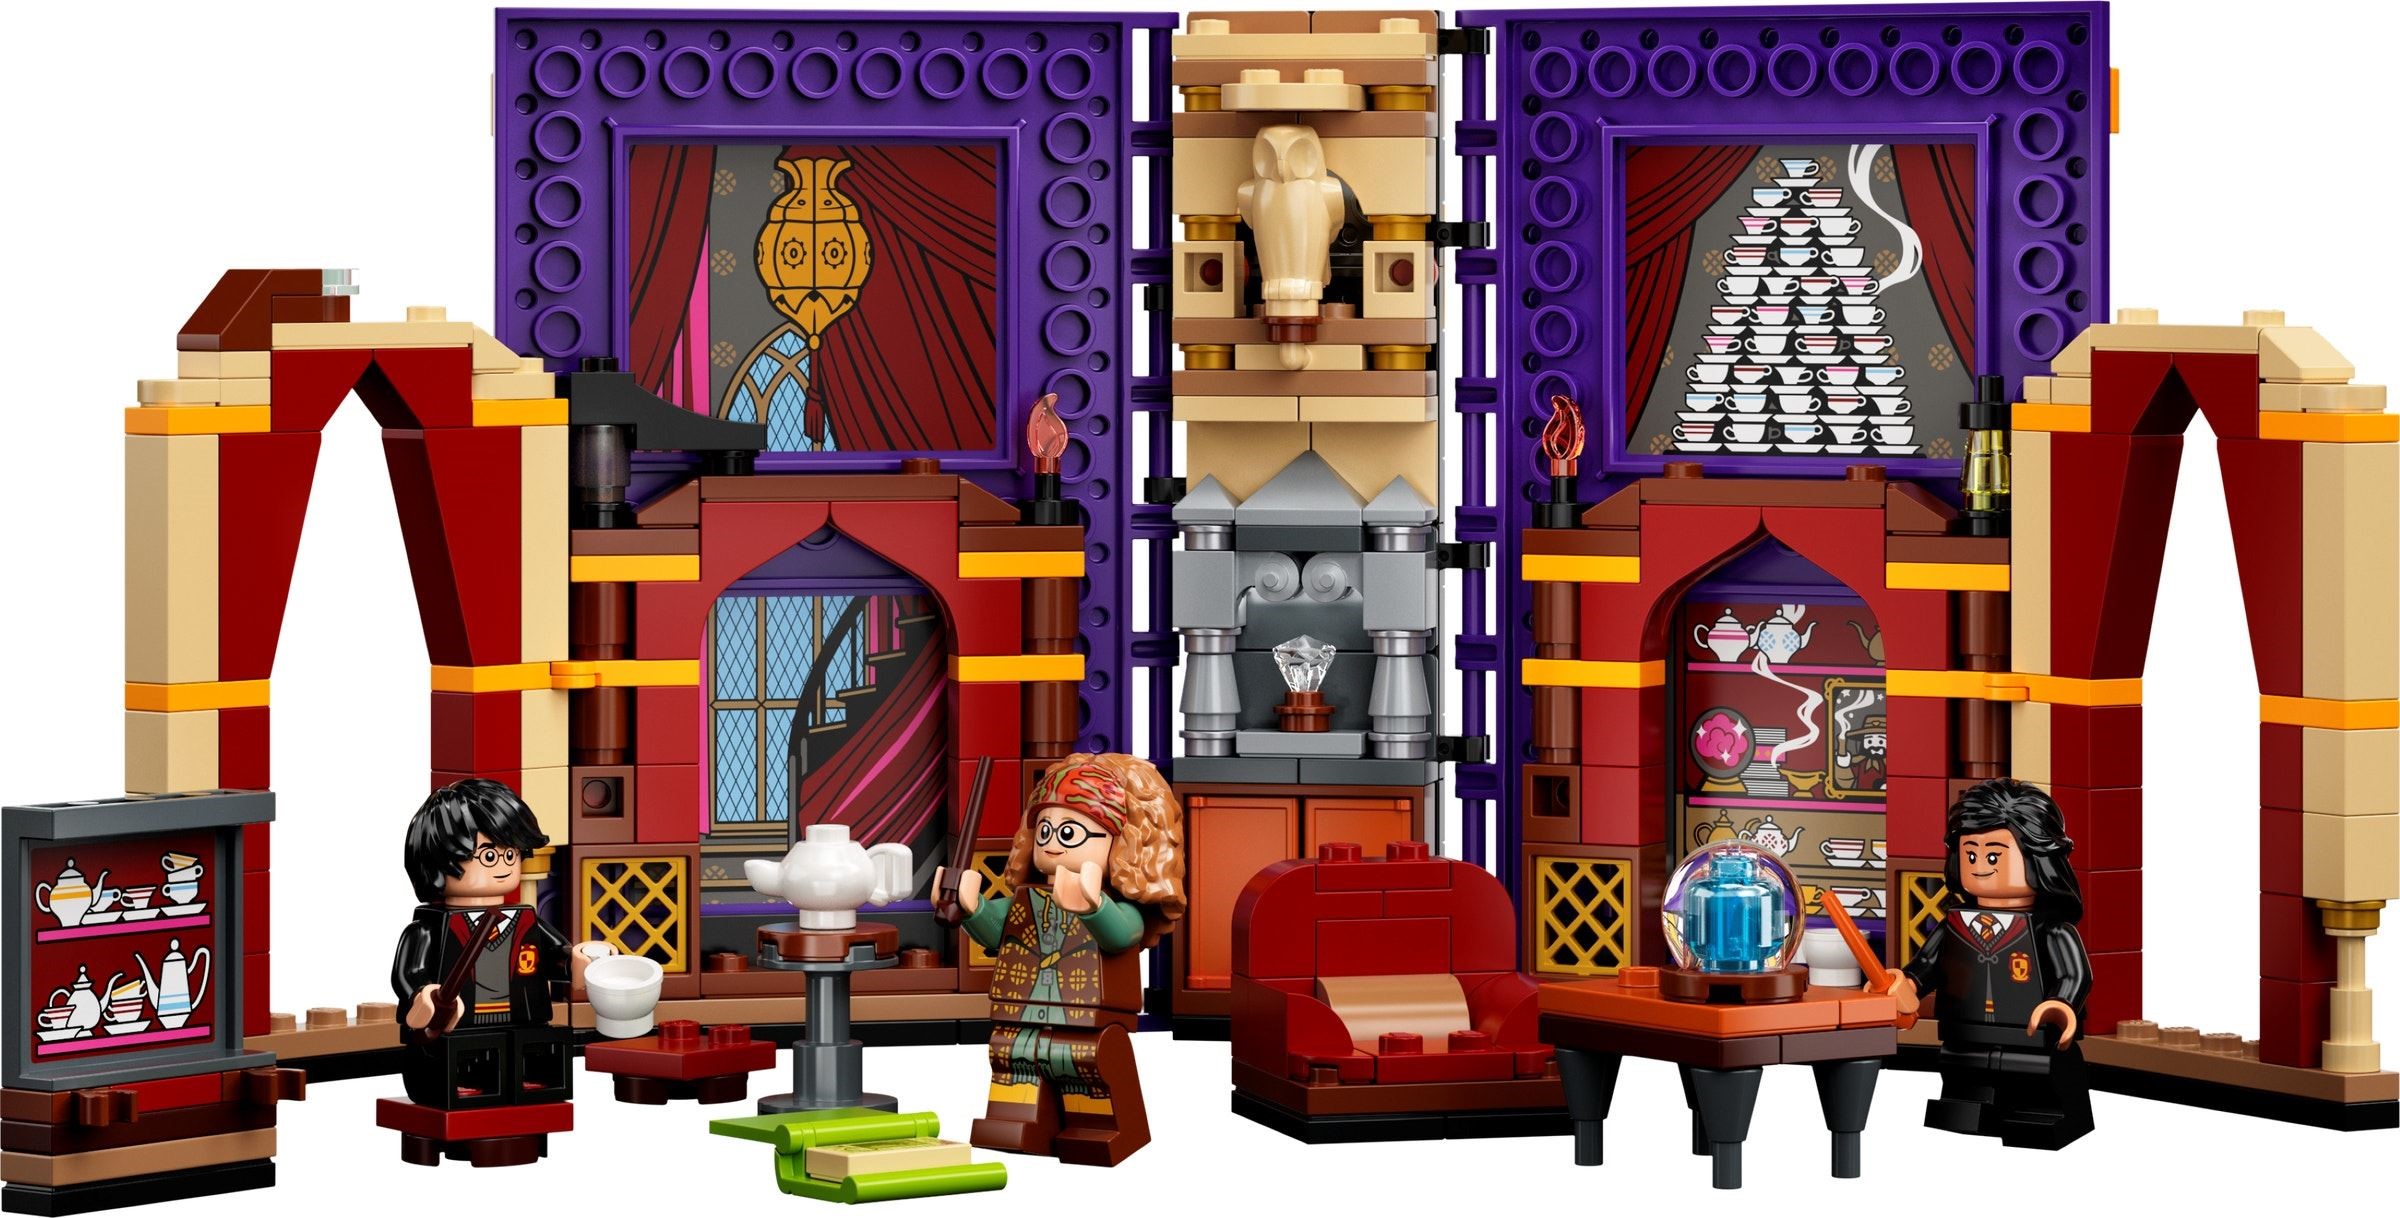 CW: HP) LEGO® Harry Potter review: Hogwarts Moments